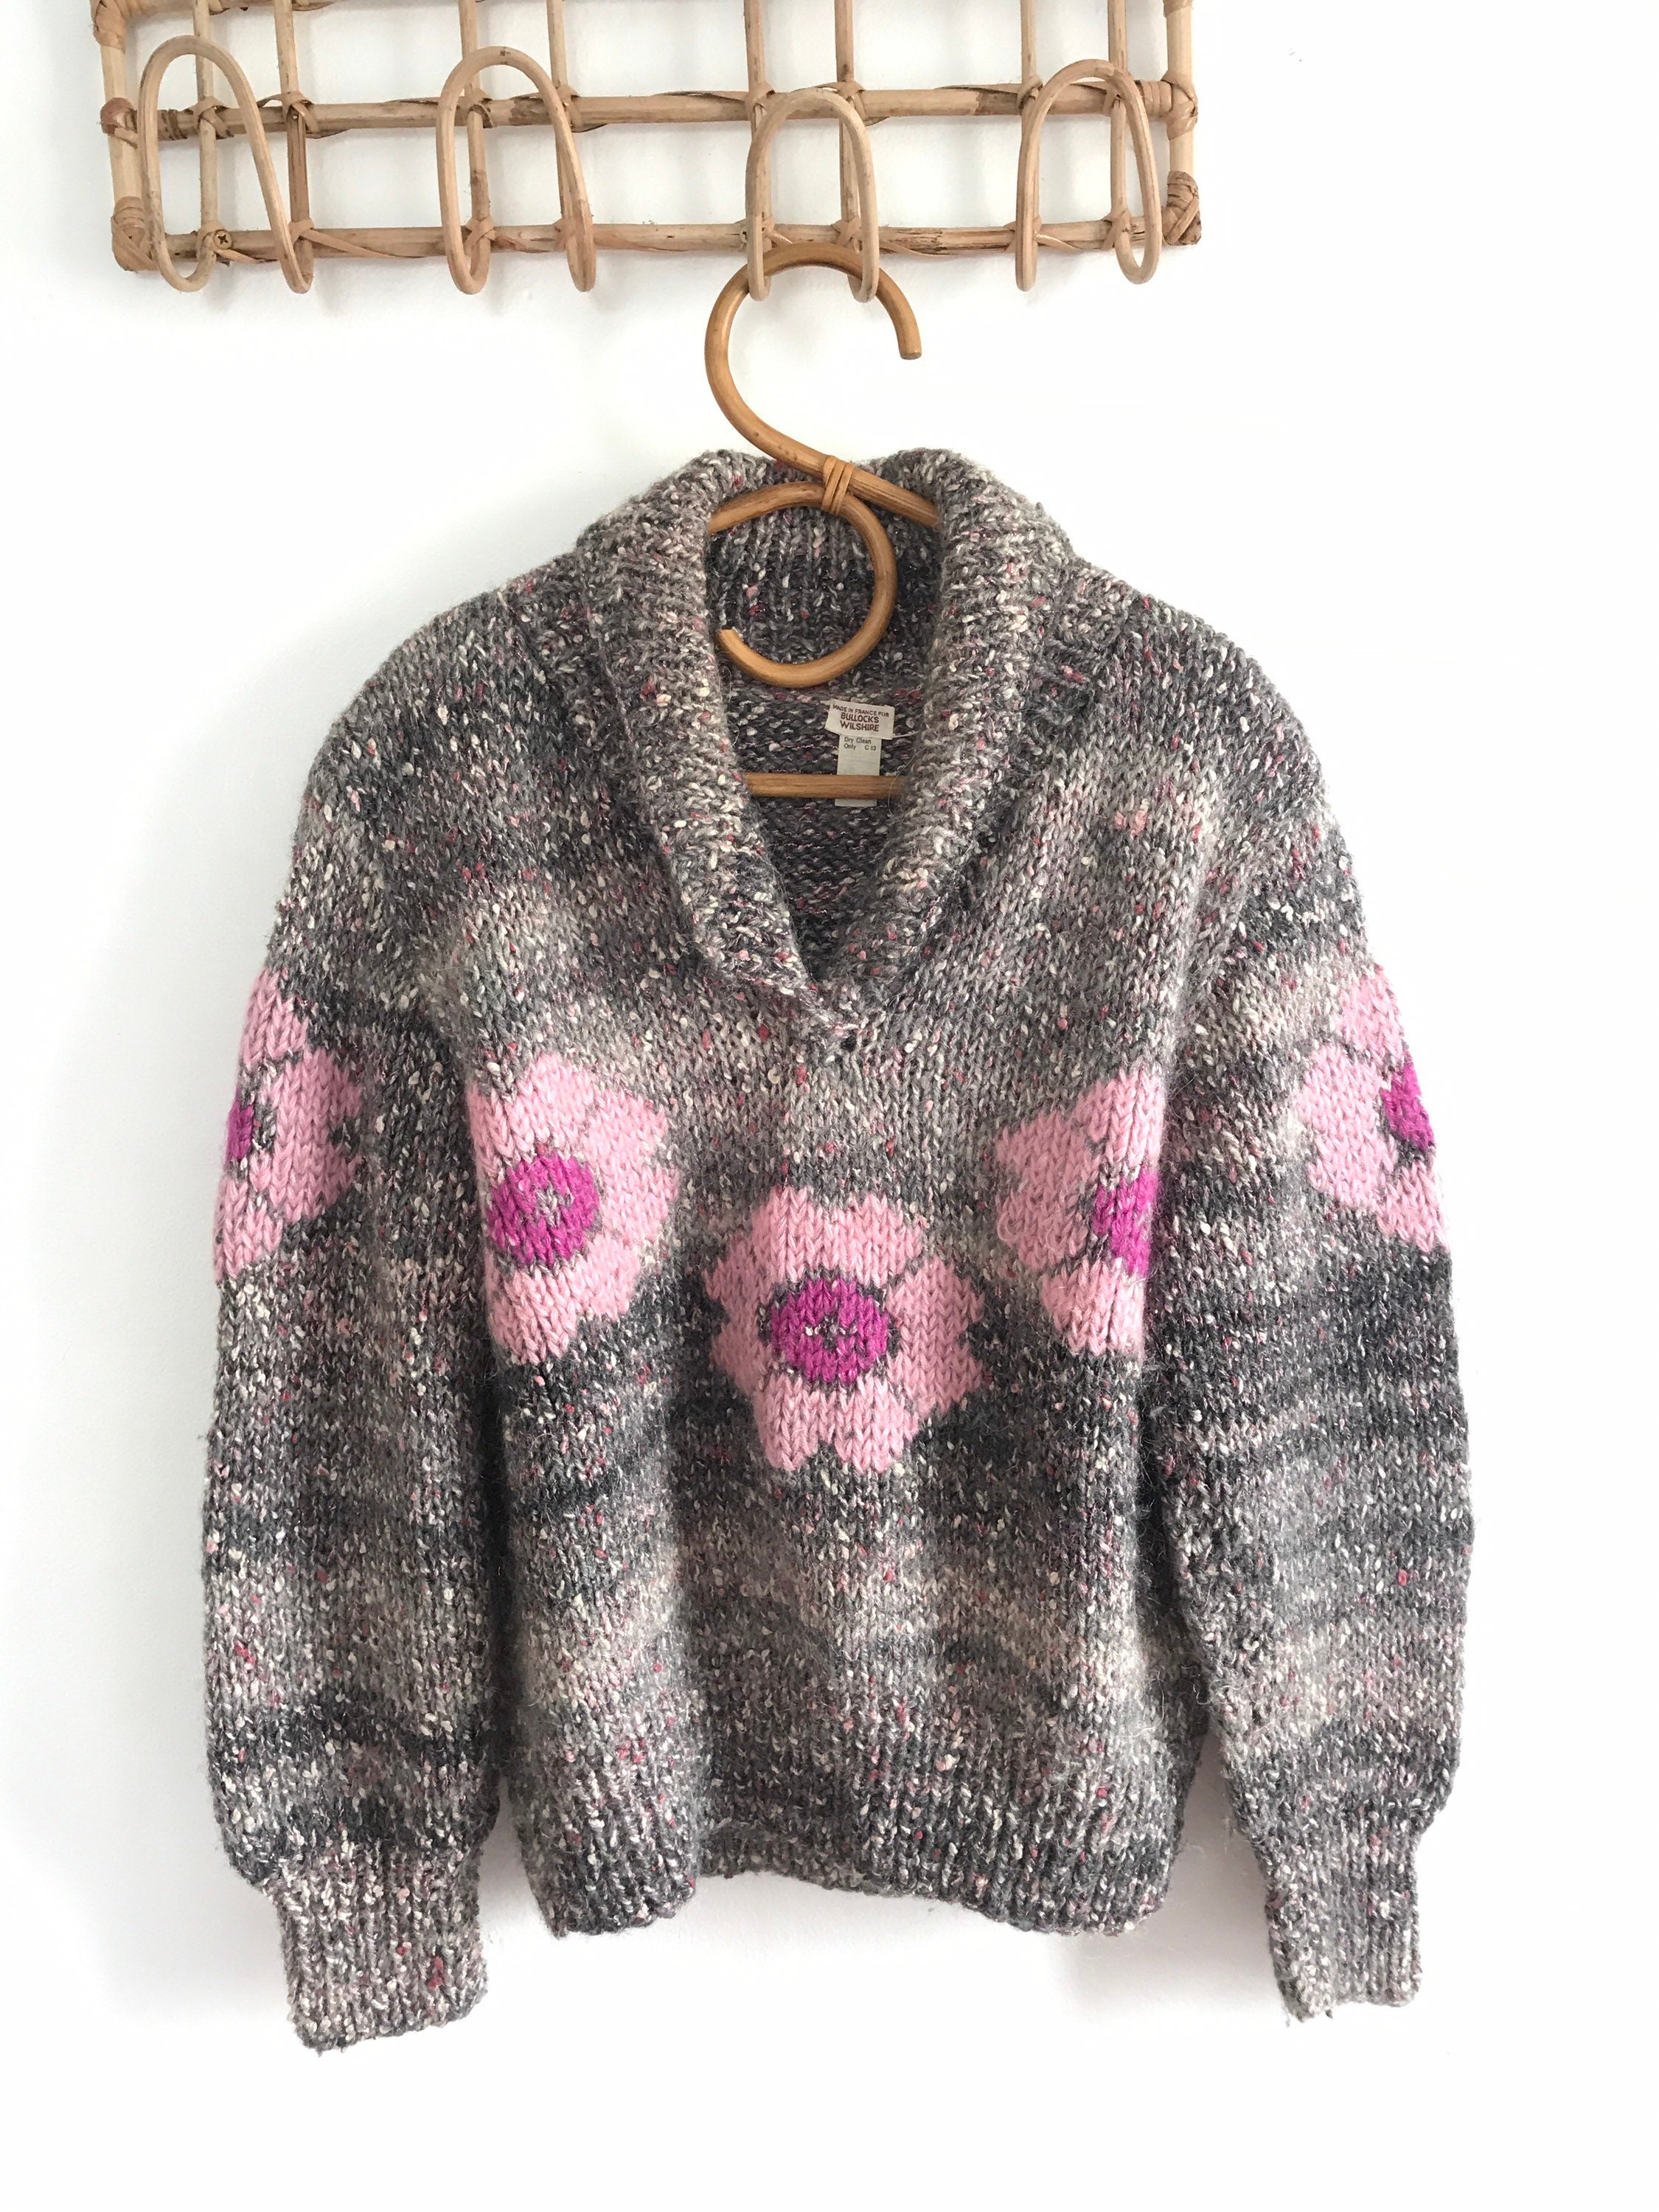 1990's Bullocks Wilshire Mohair Blend Sweater, Made in France, Metallic, Floral, Wool Designer Medium, Confetti, Cozy, Knit, Large